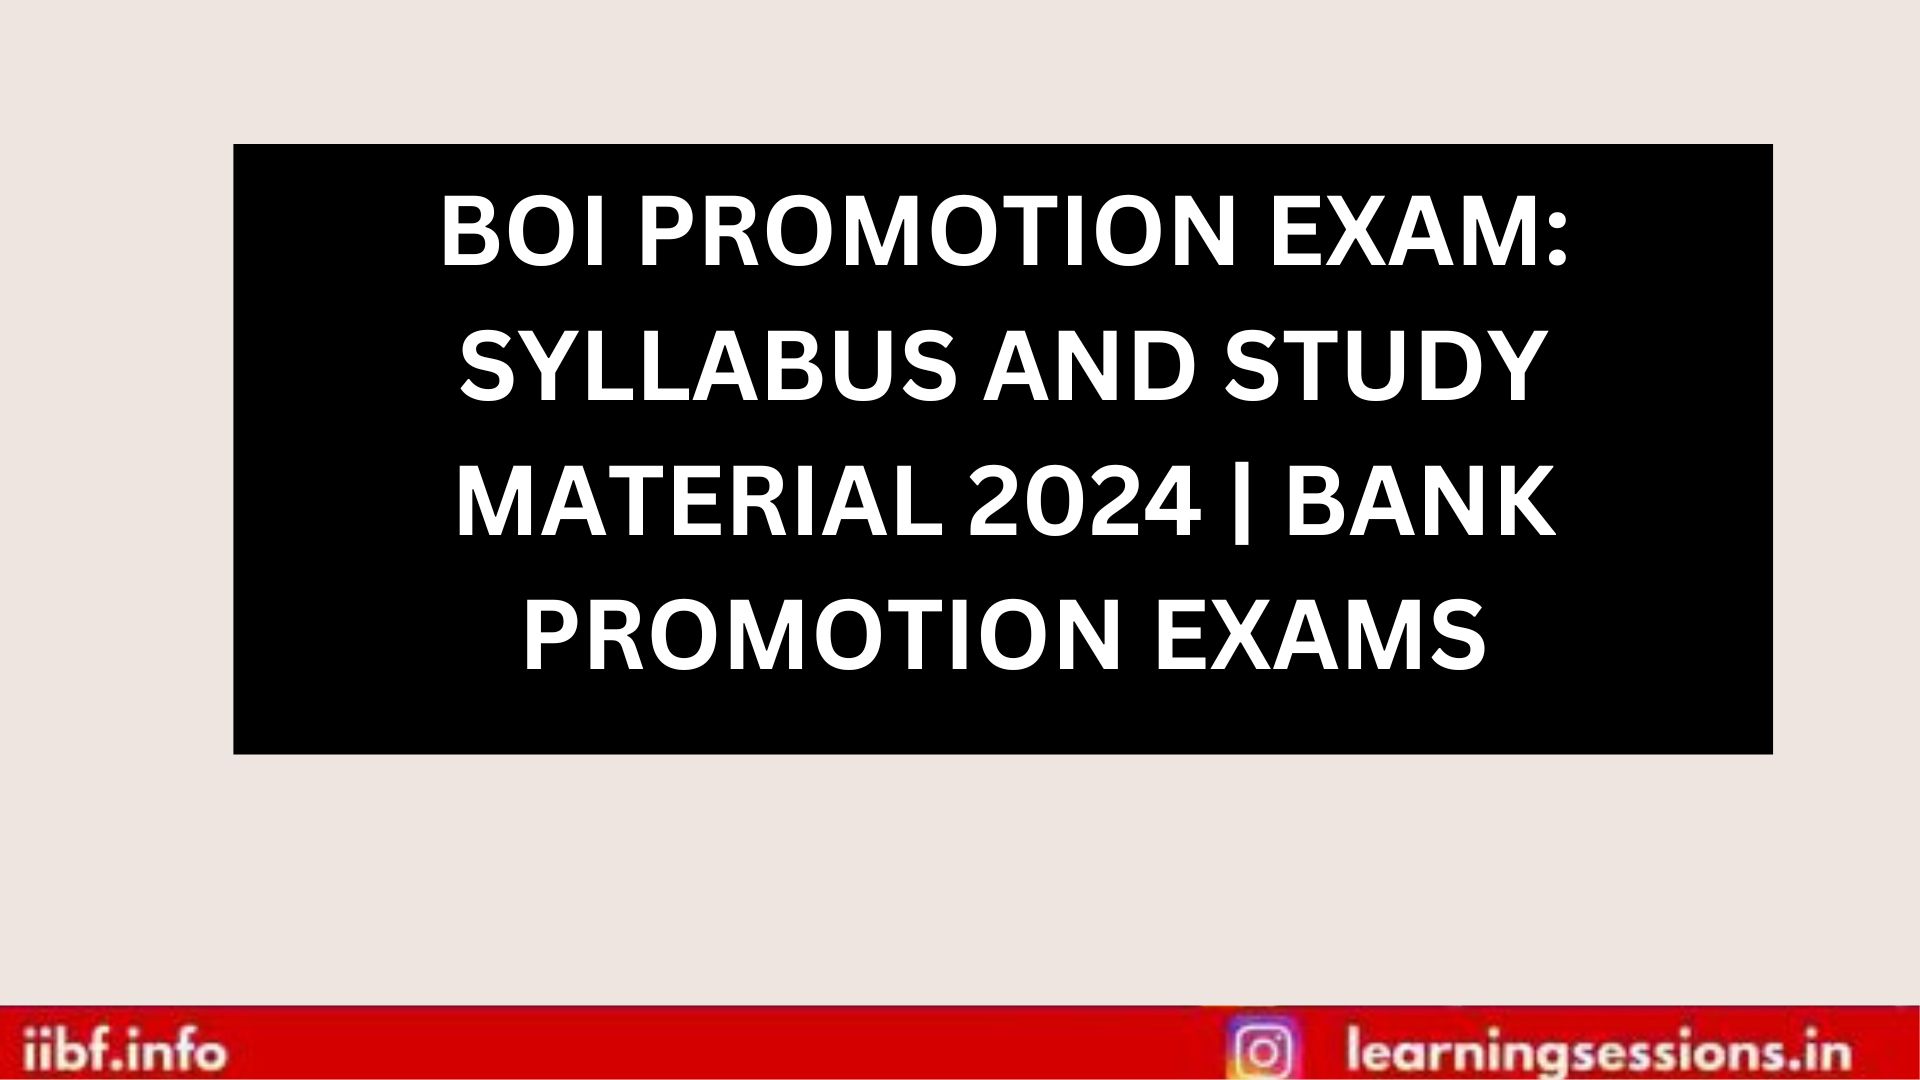 BOI PROMOTION EXAM: SYLLABUS AND STUDY MATERIAL 2024 | BANK PROMOTION EXAMS